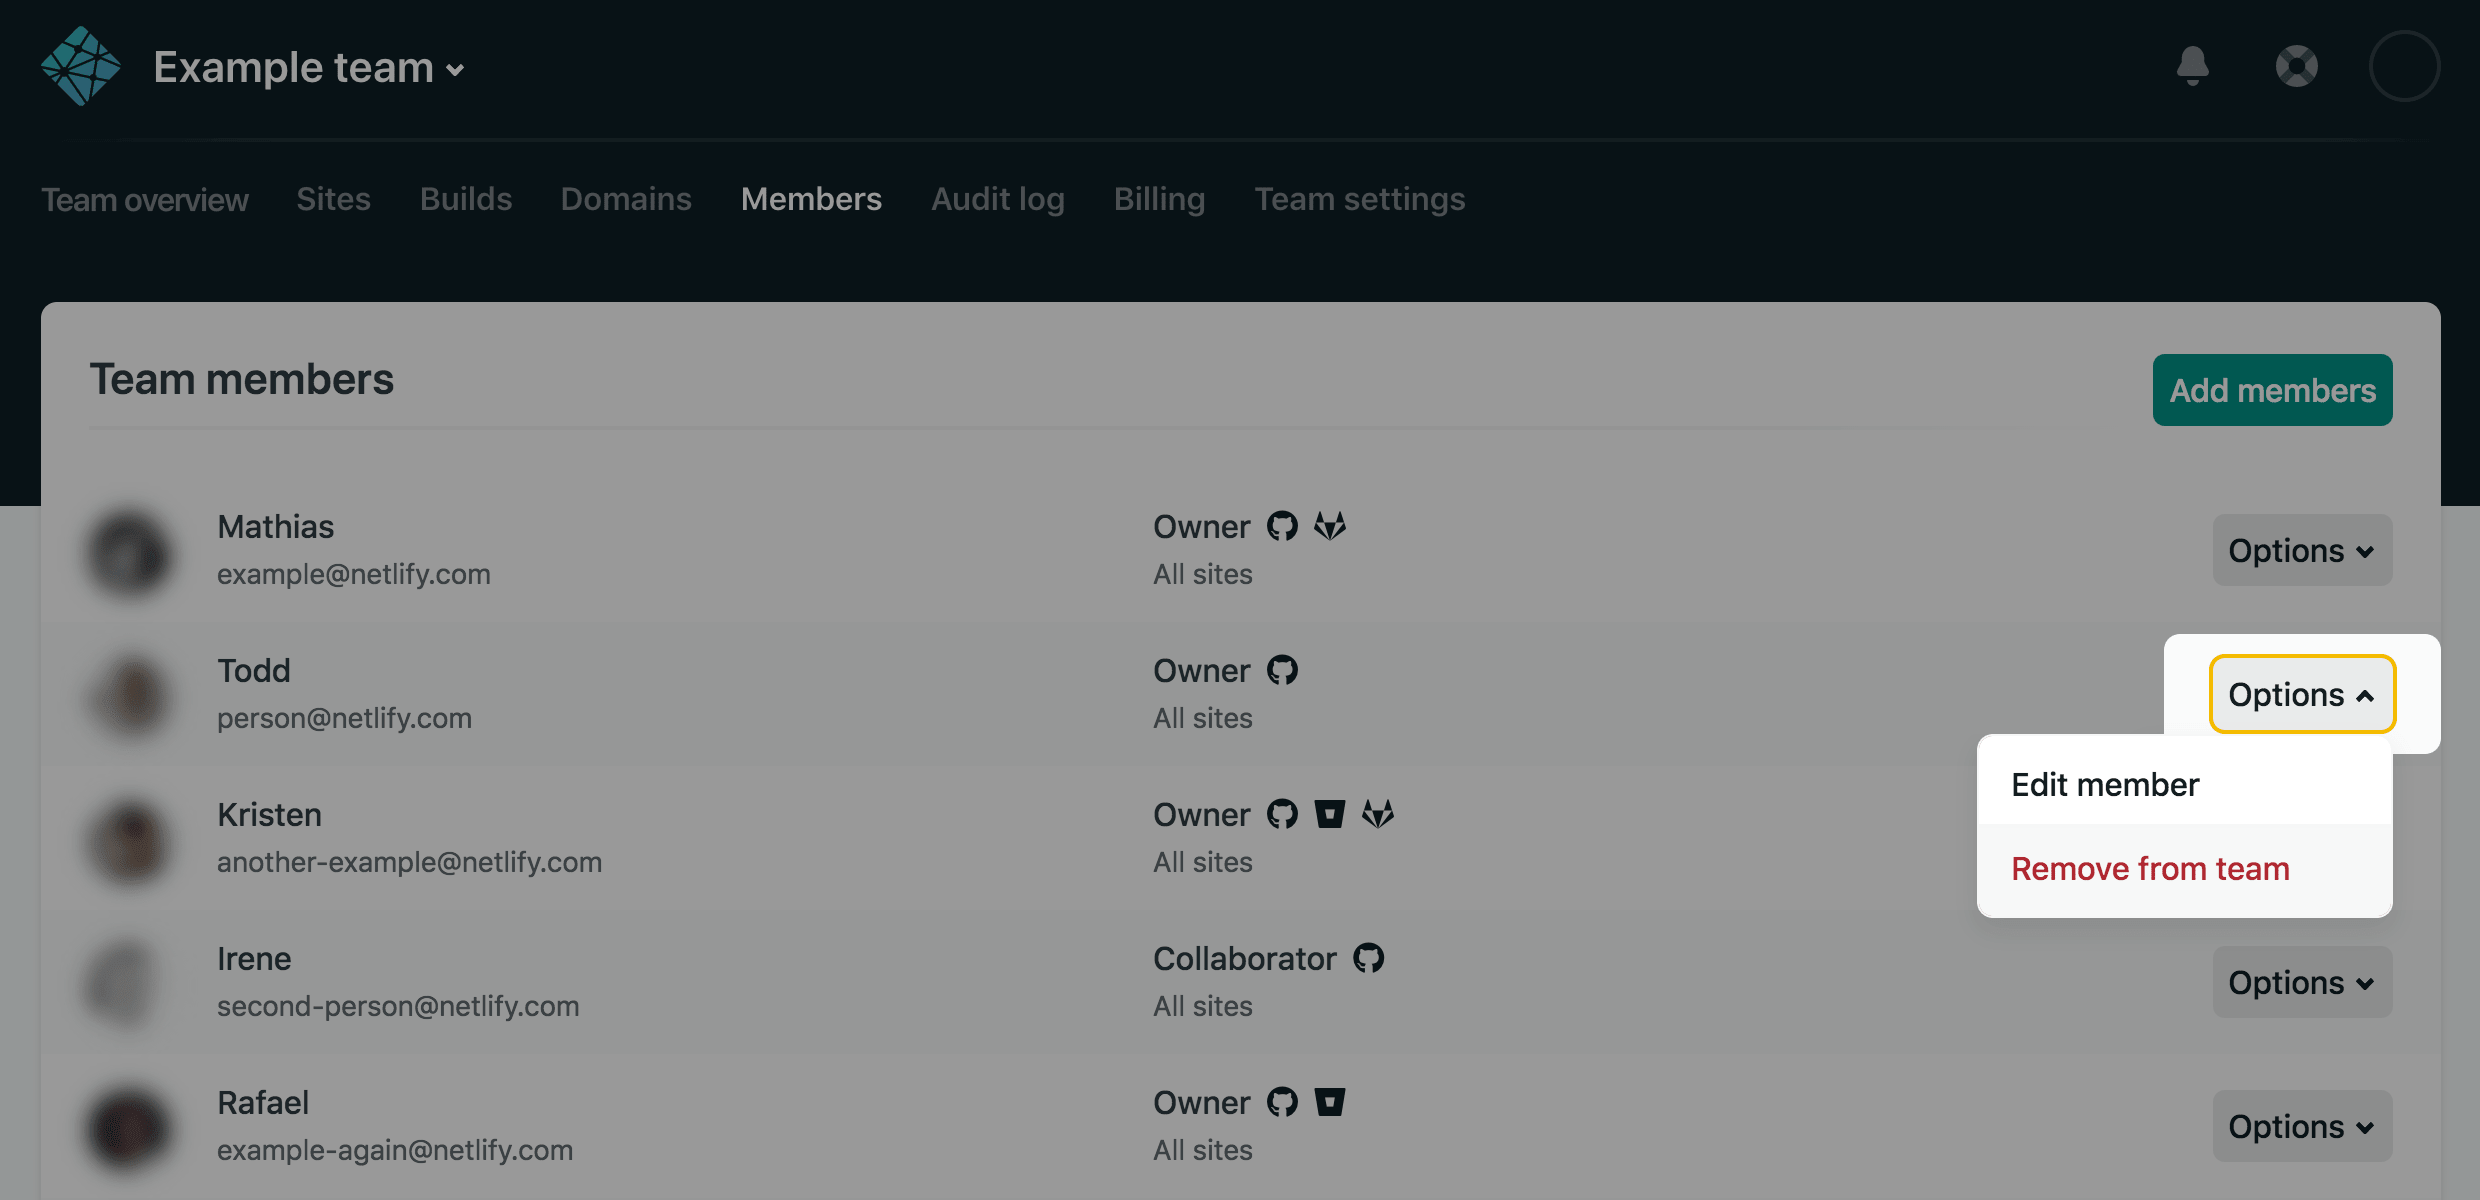 Owners can use the "Options" menu to remove or edit a member.